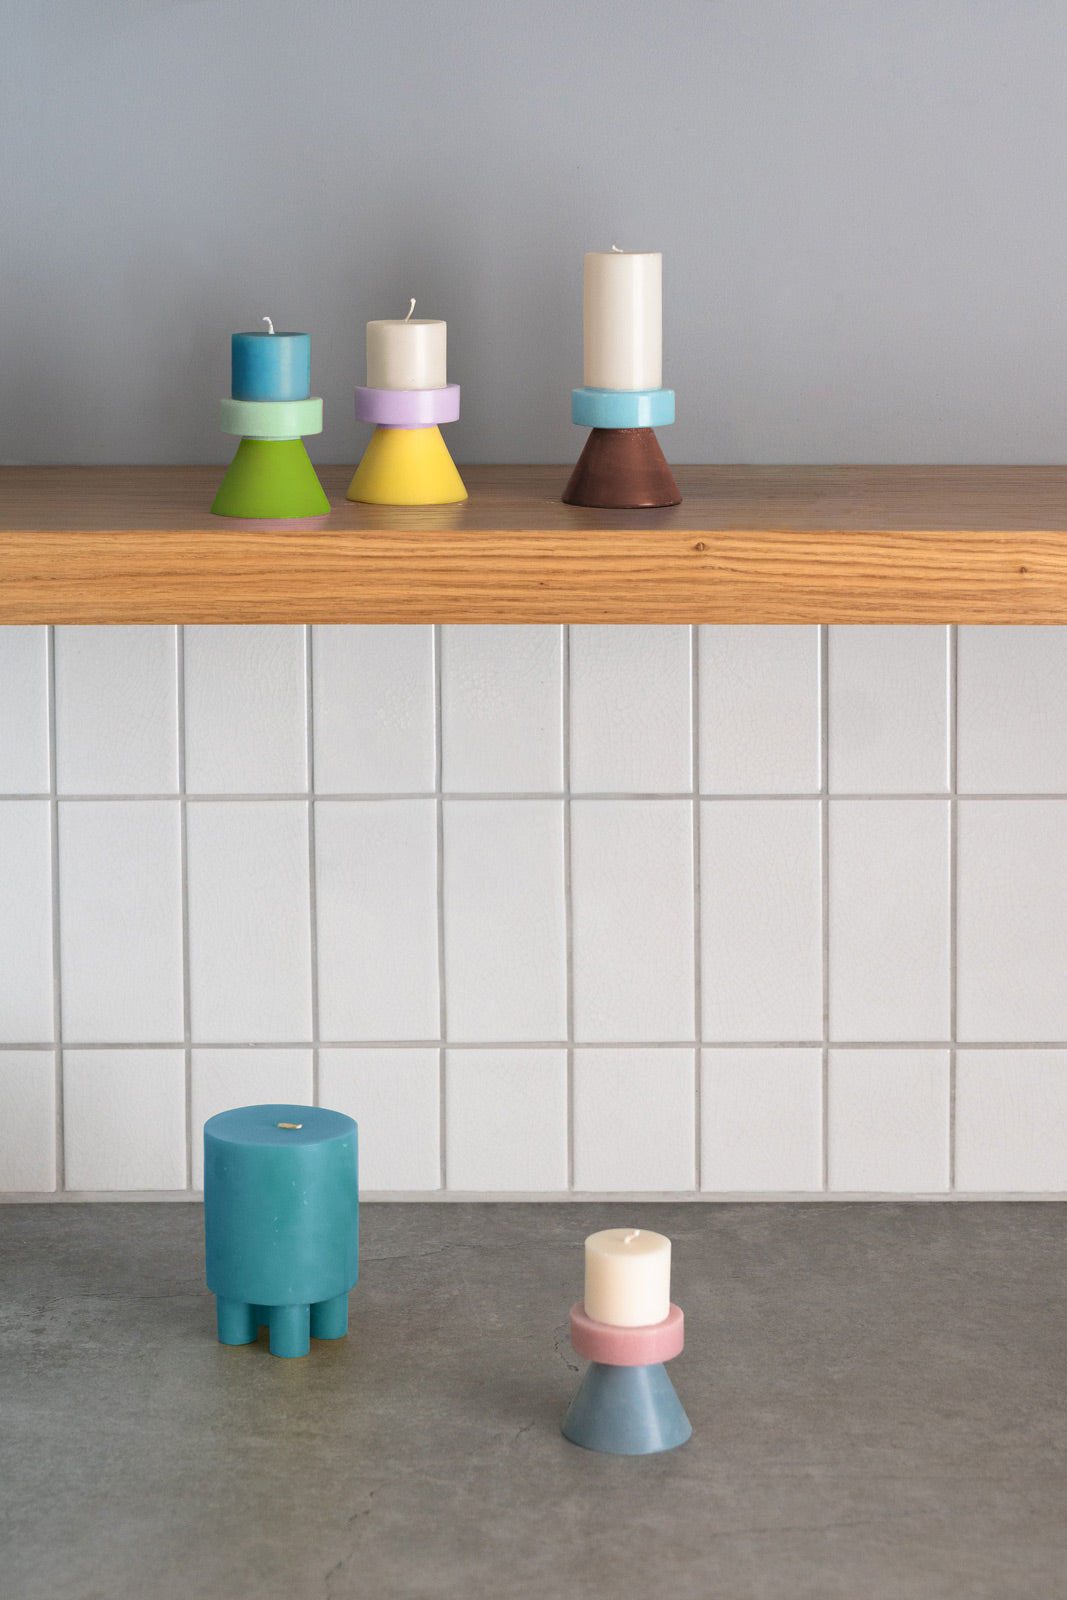 Stack Candle tall by Yod and co in white, blue and brown